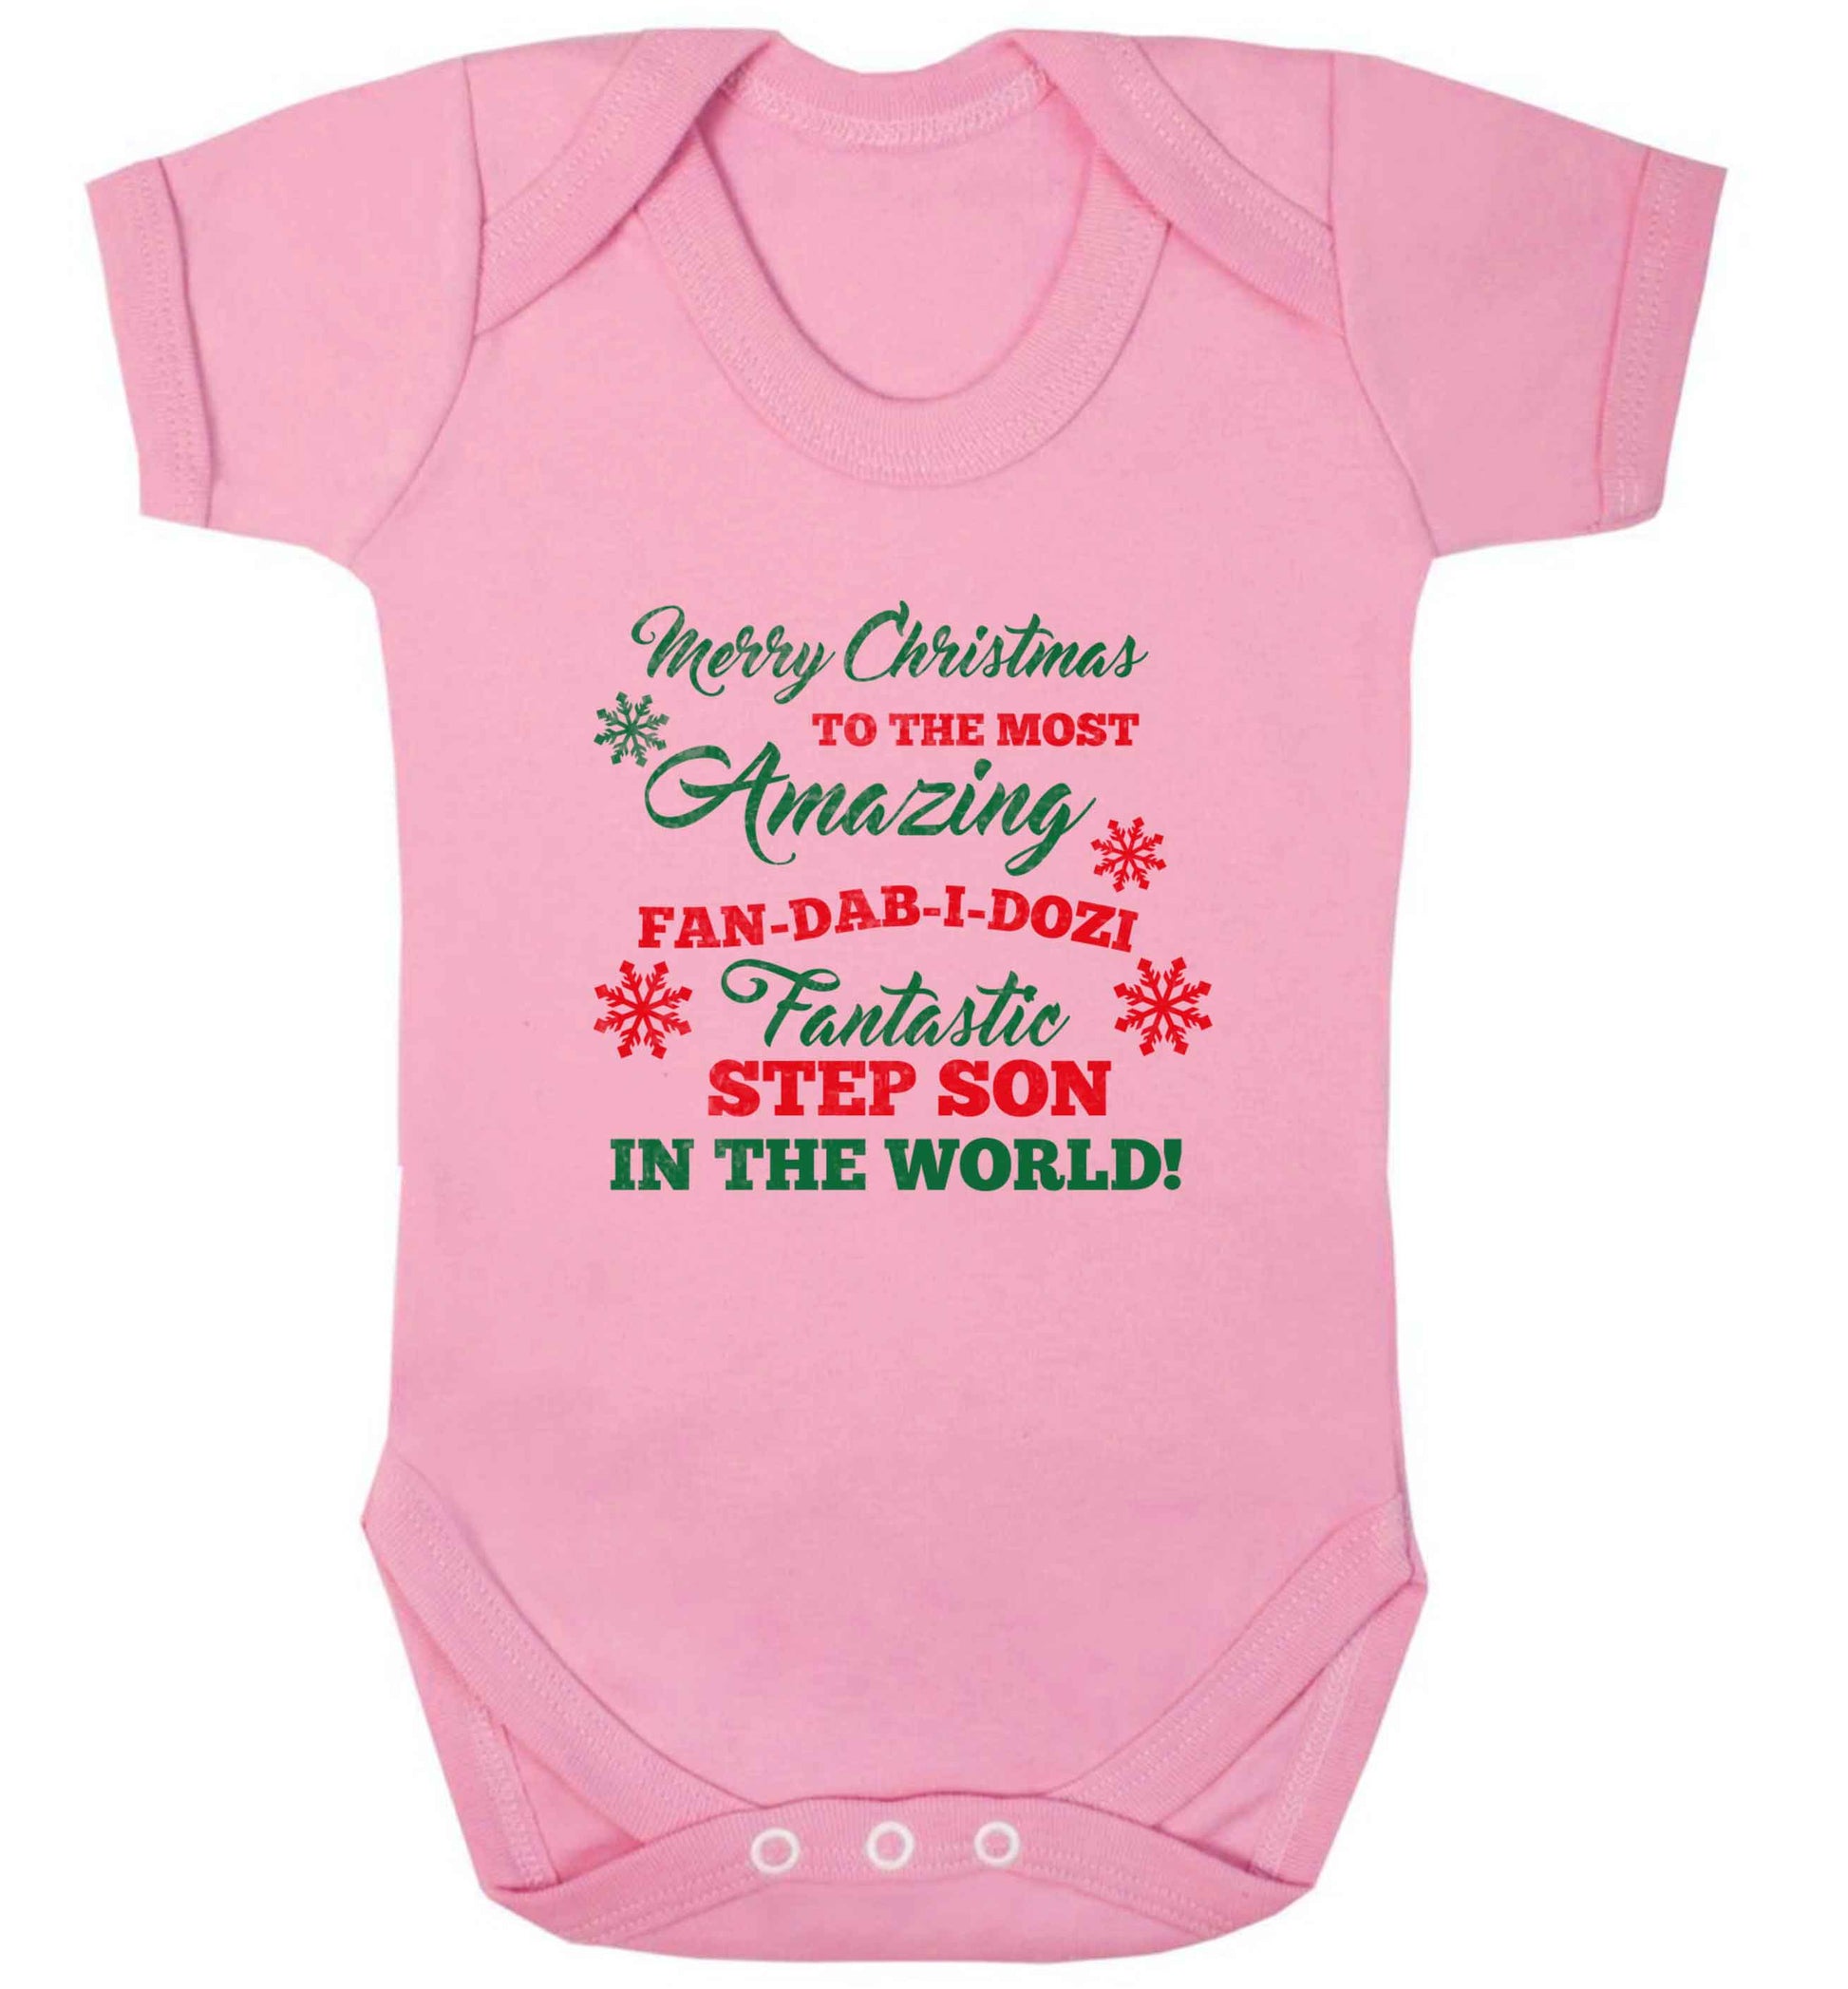 Merry Christmas to the most amazing fan-dab-i-dozi fantasic Step Son in the world baby vest pale pink 18-24 months